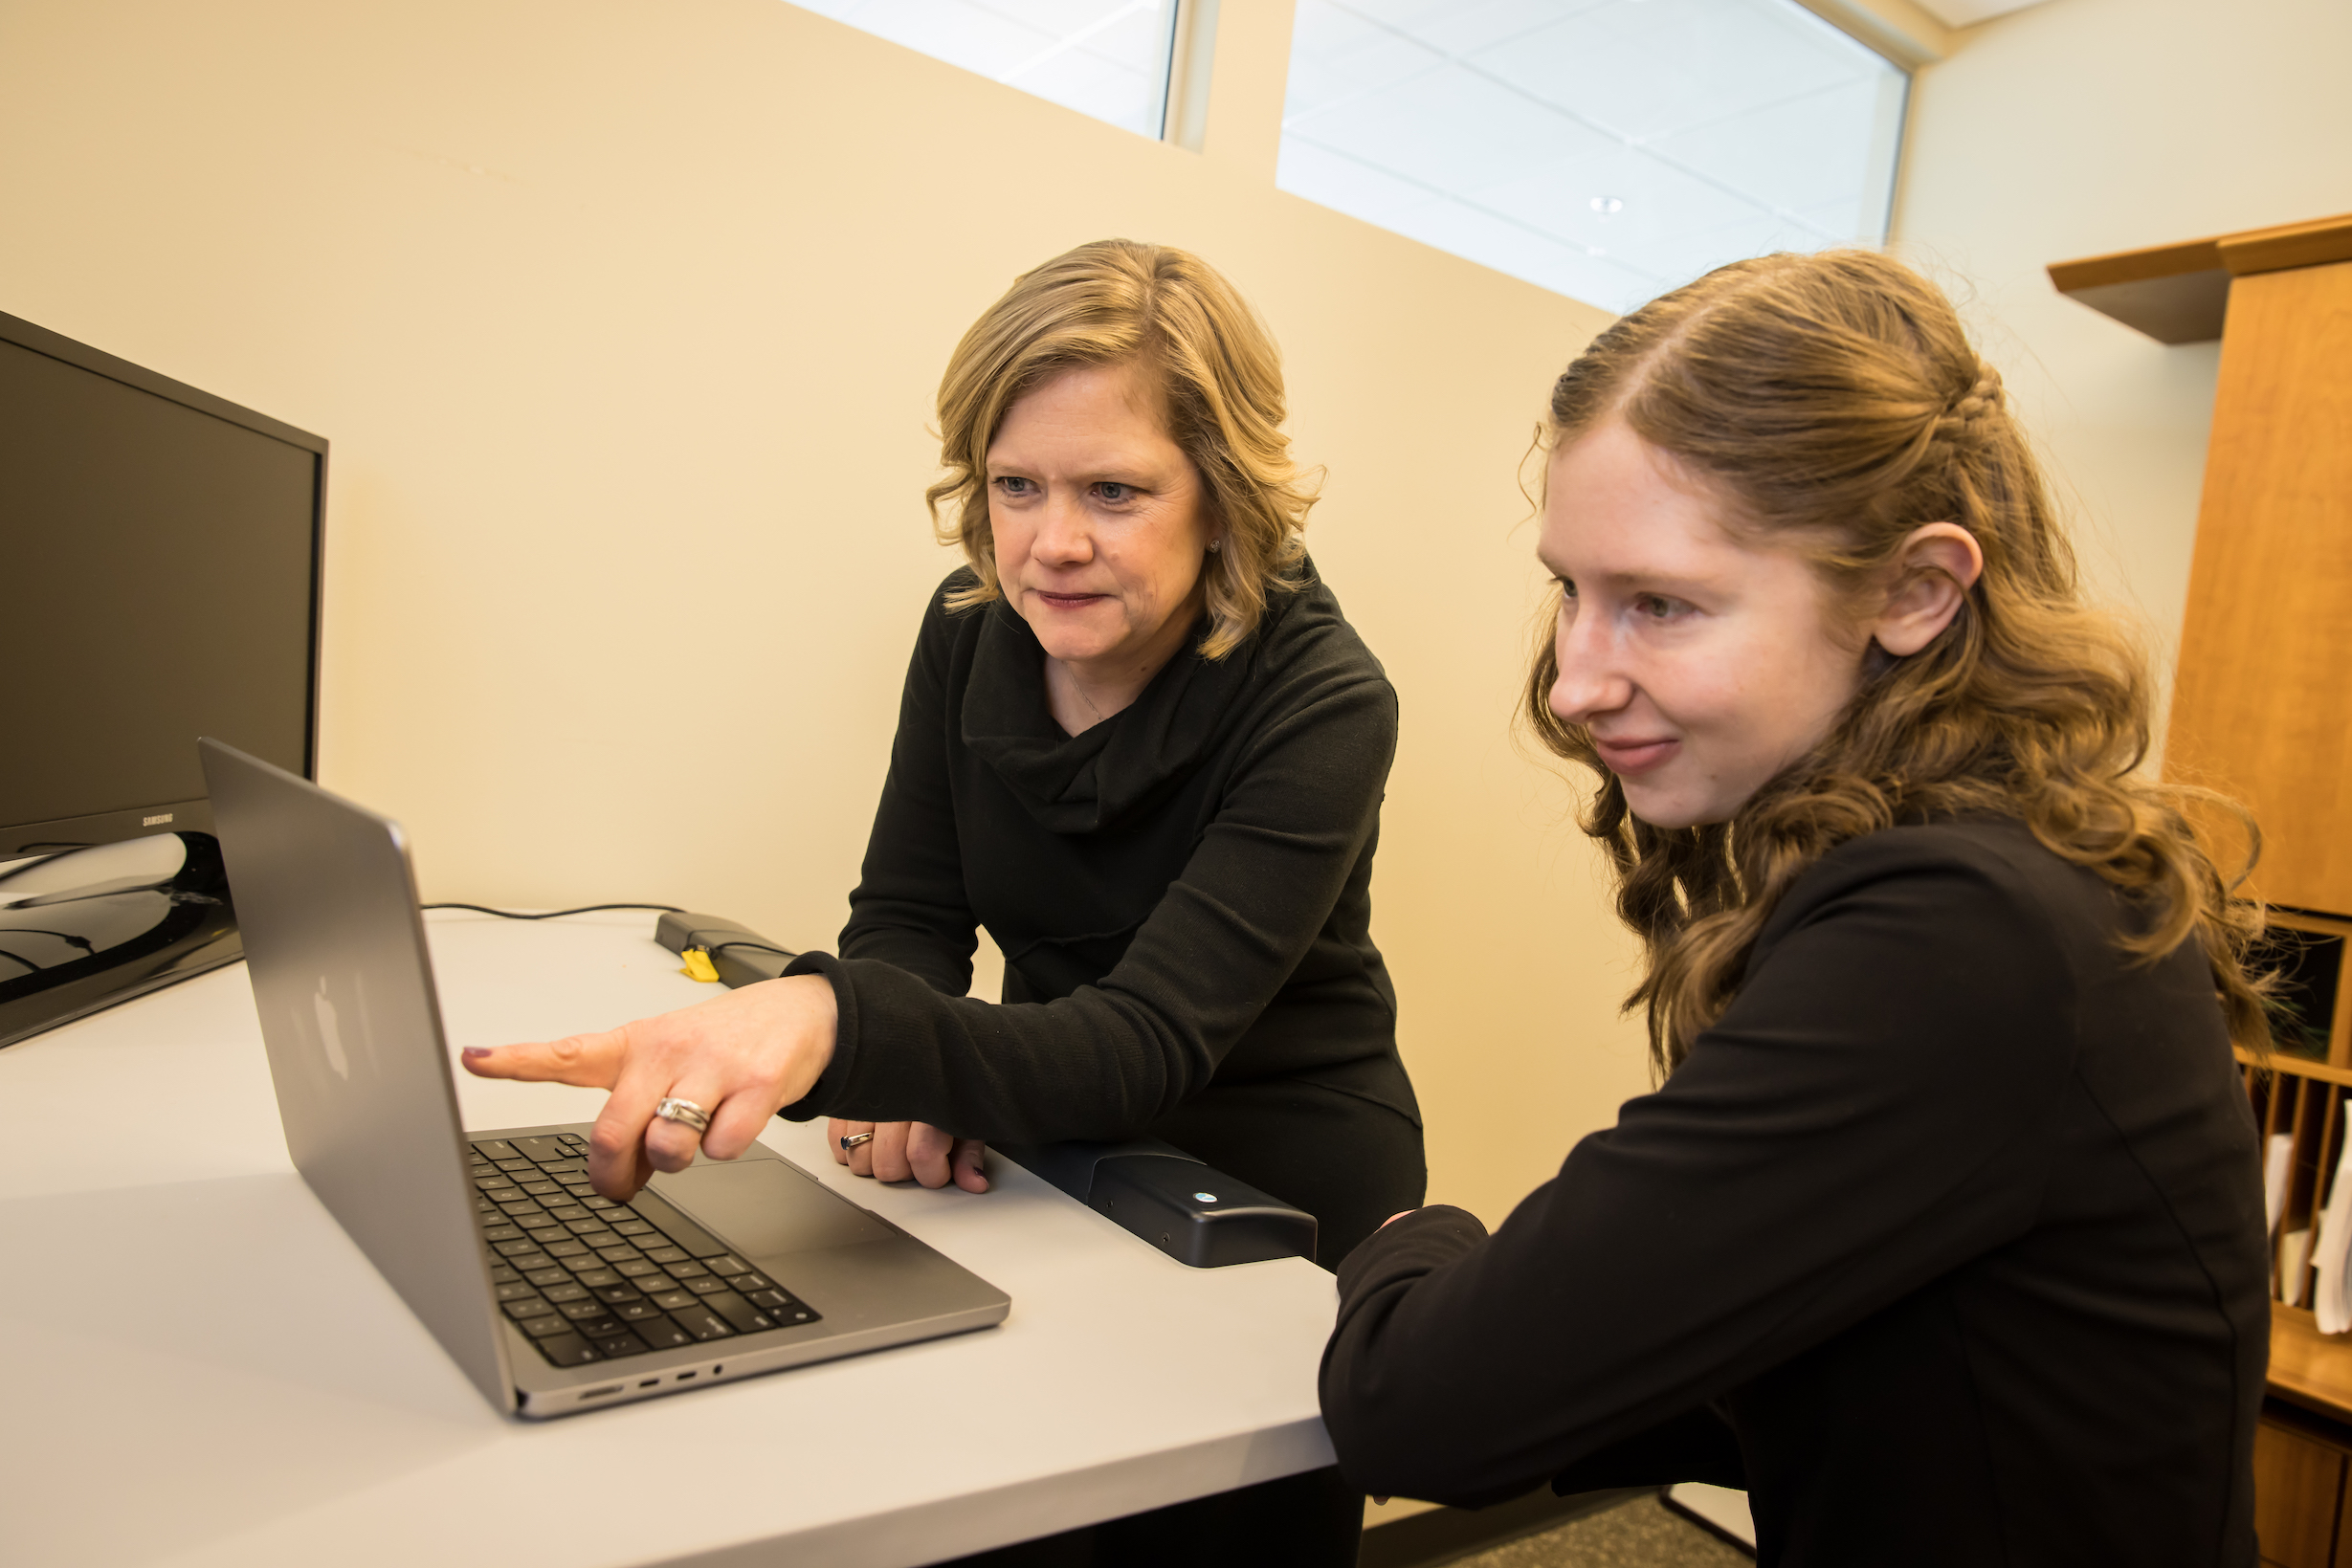 Angie Fagerlin, PhD, and graduate student Holly Shoemaker analyzing data at the computer.